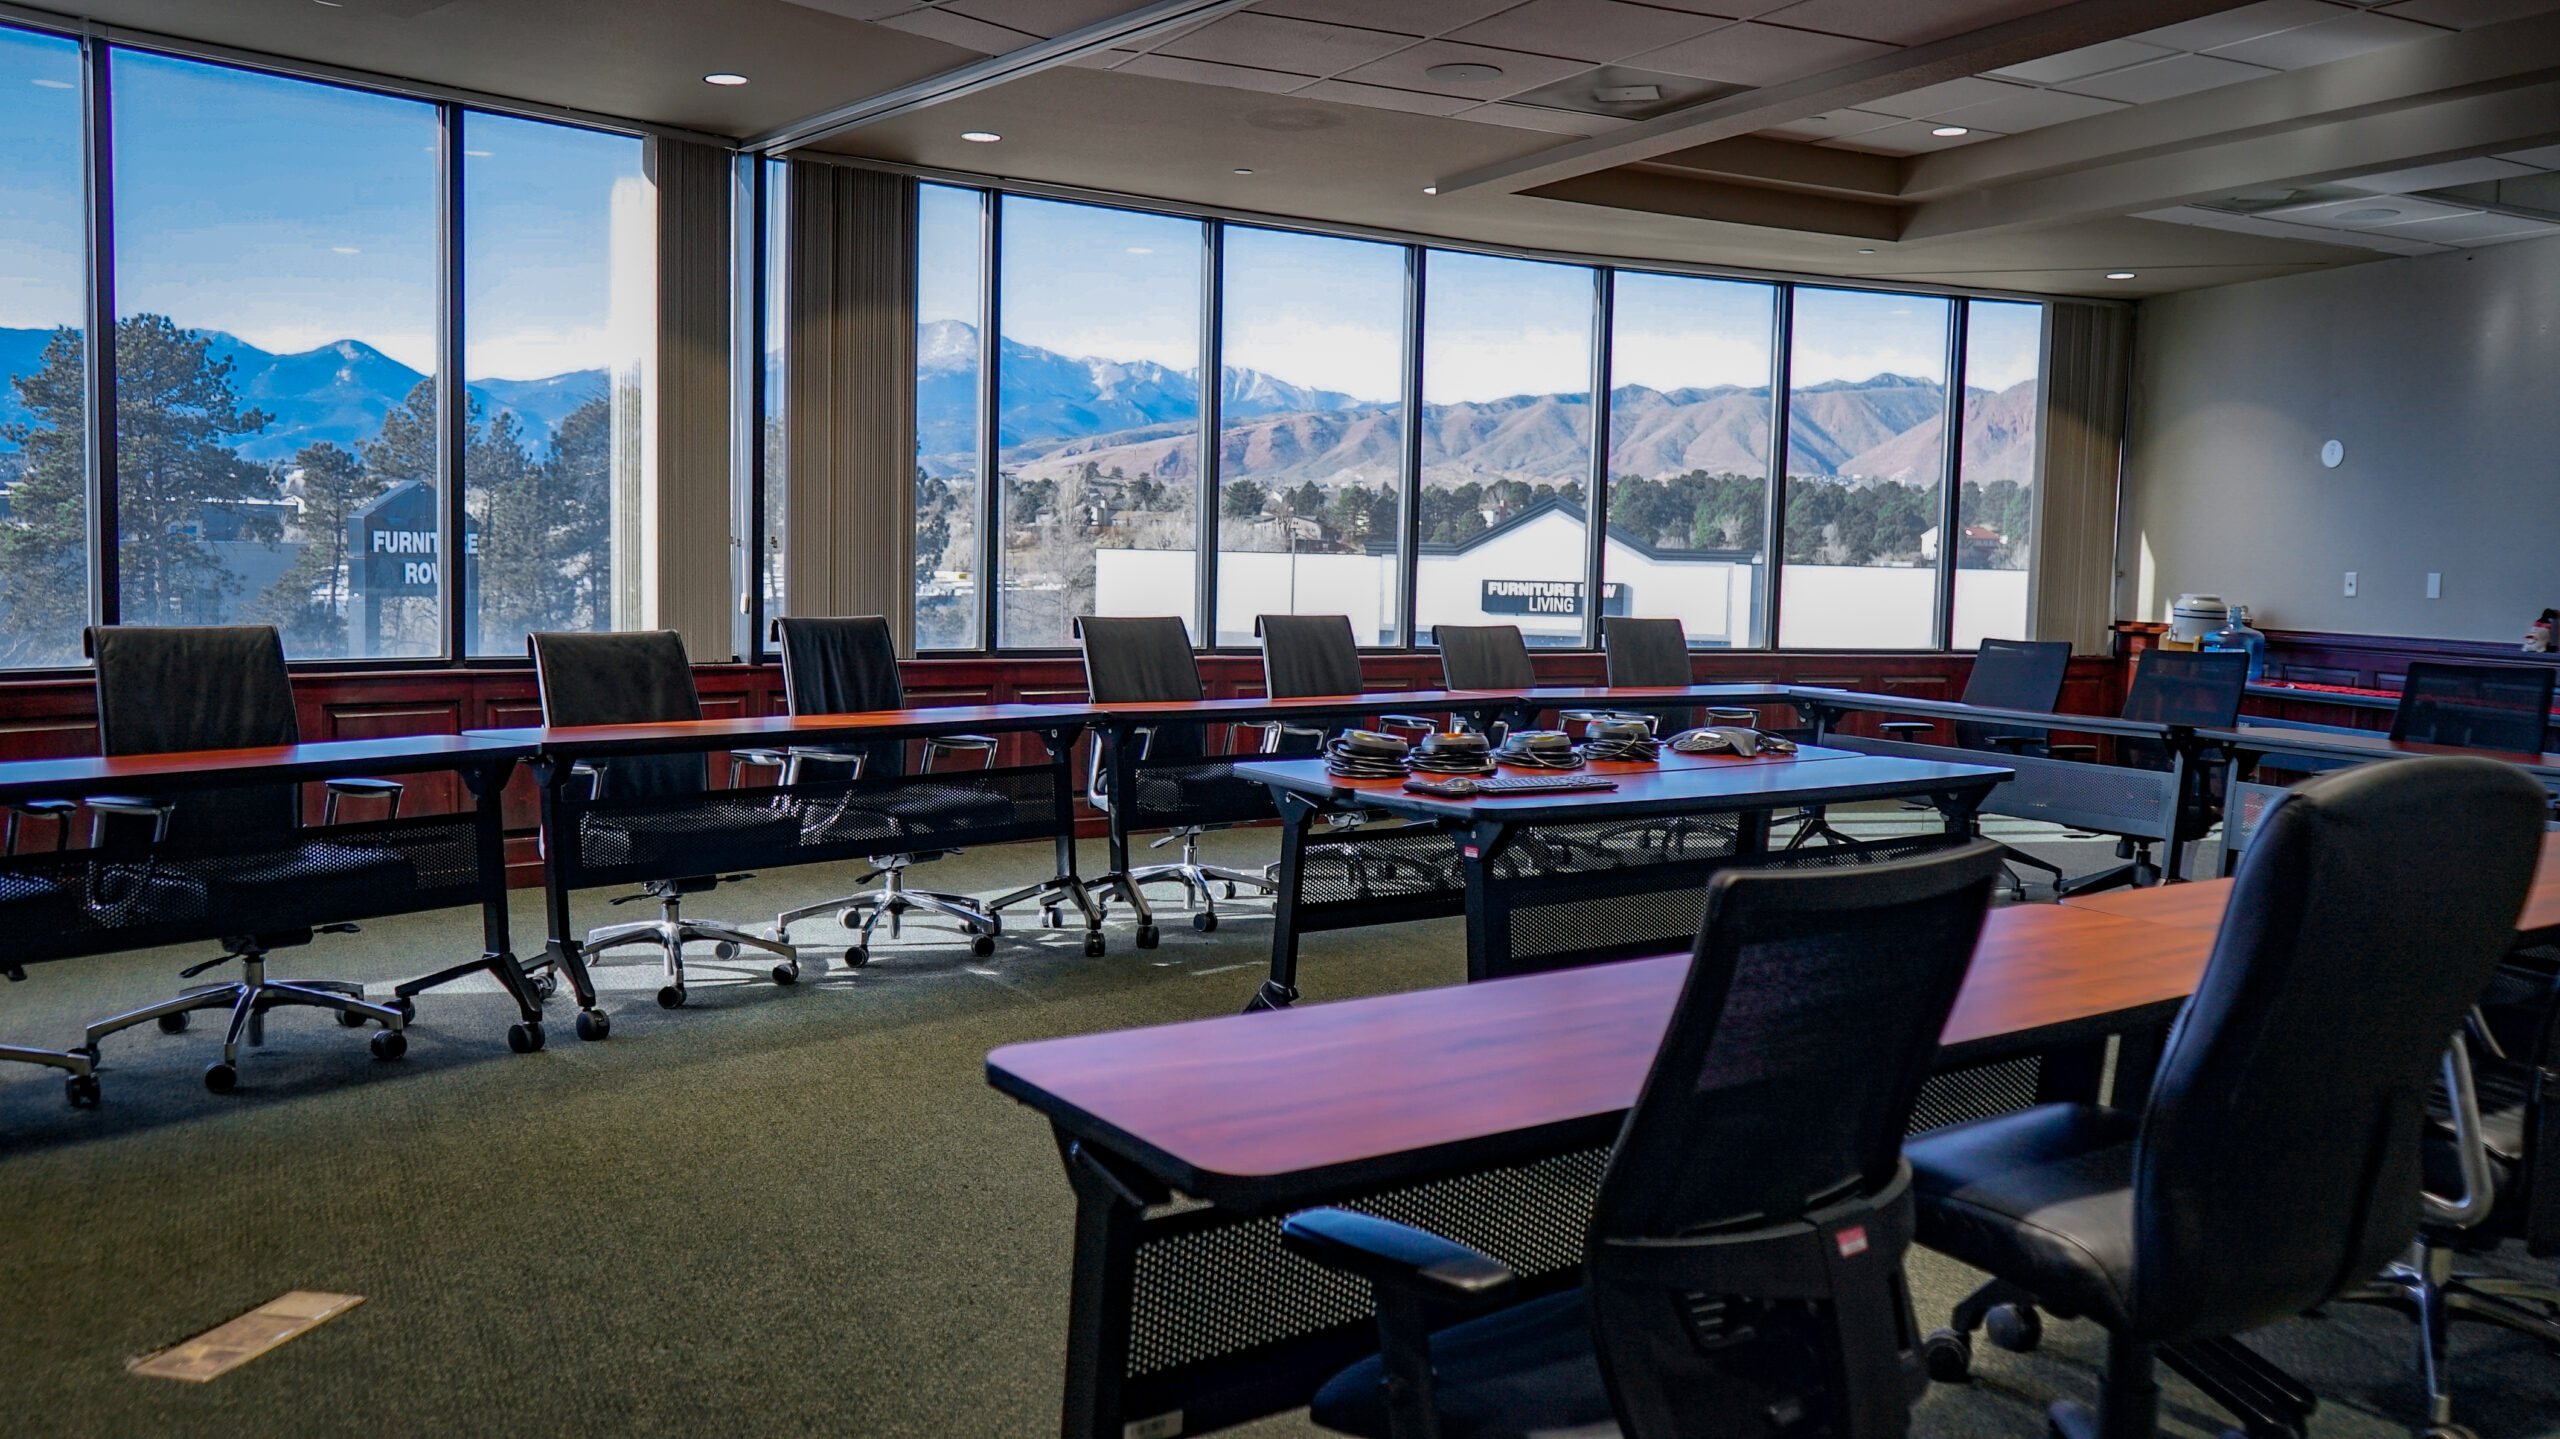 interior of a conference room looking west towards snow-covered mountains